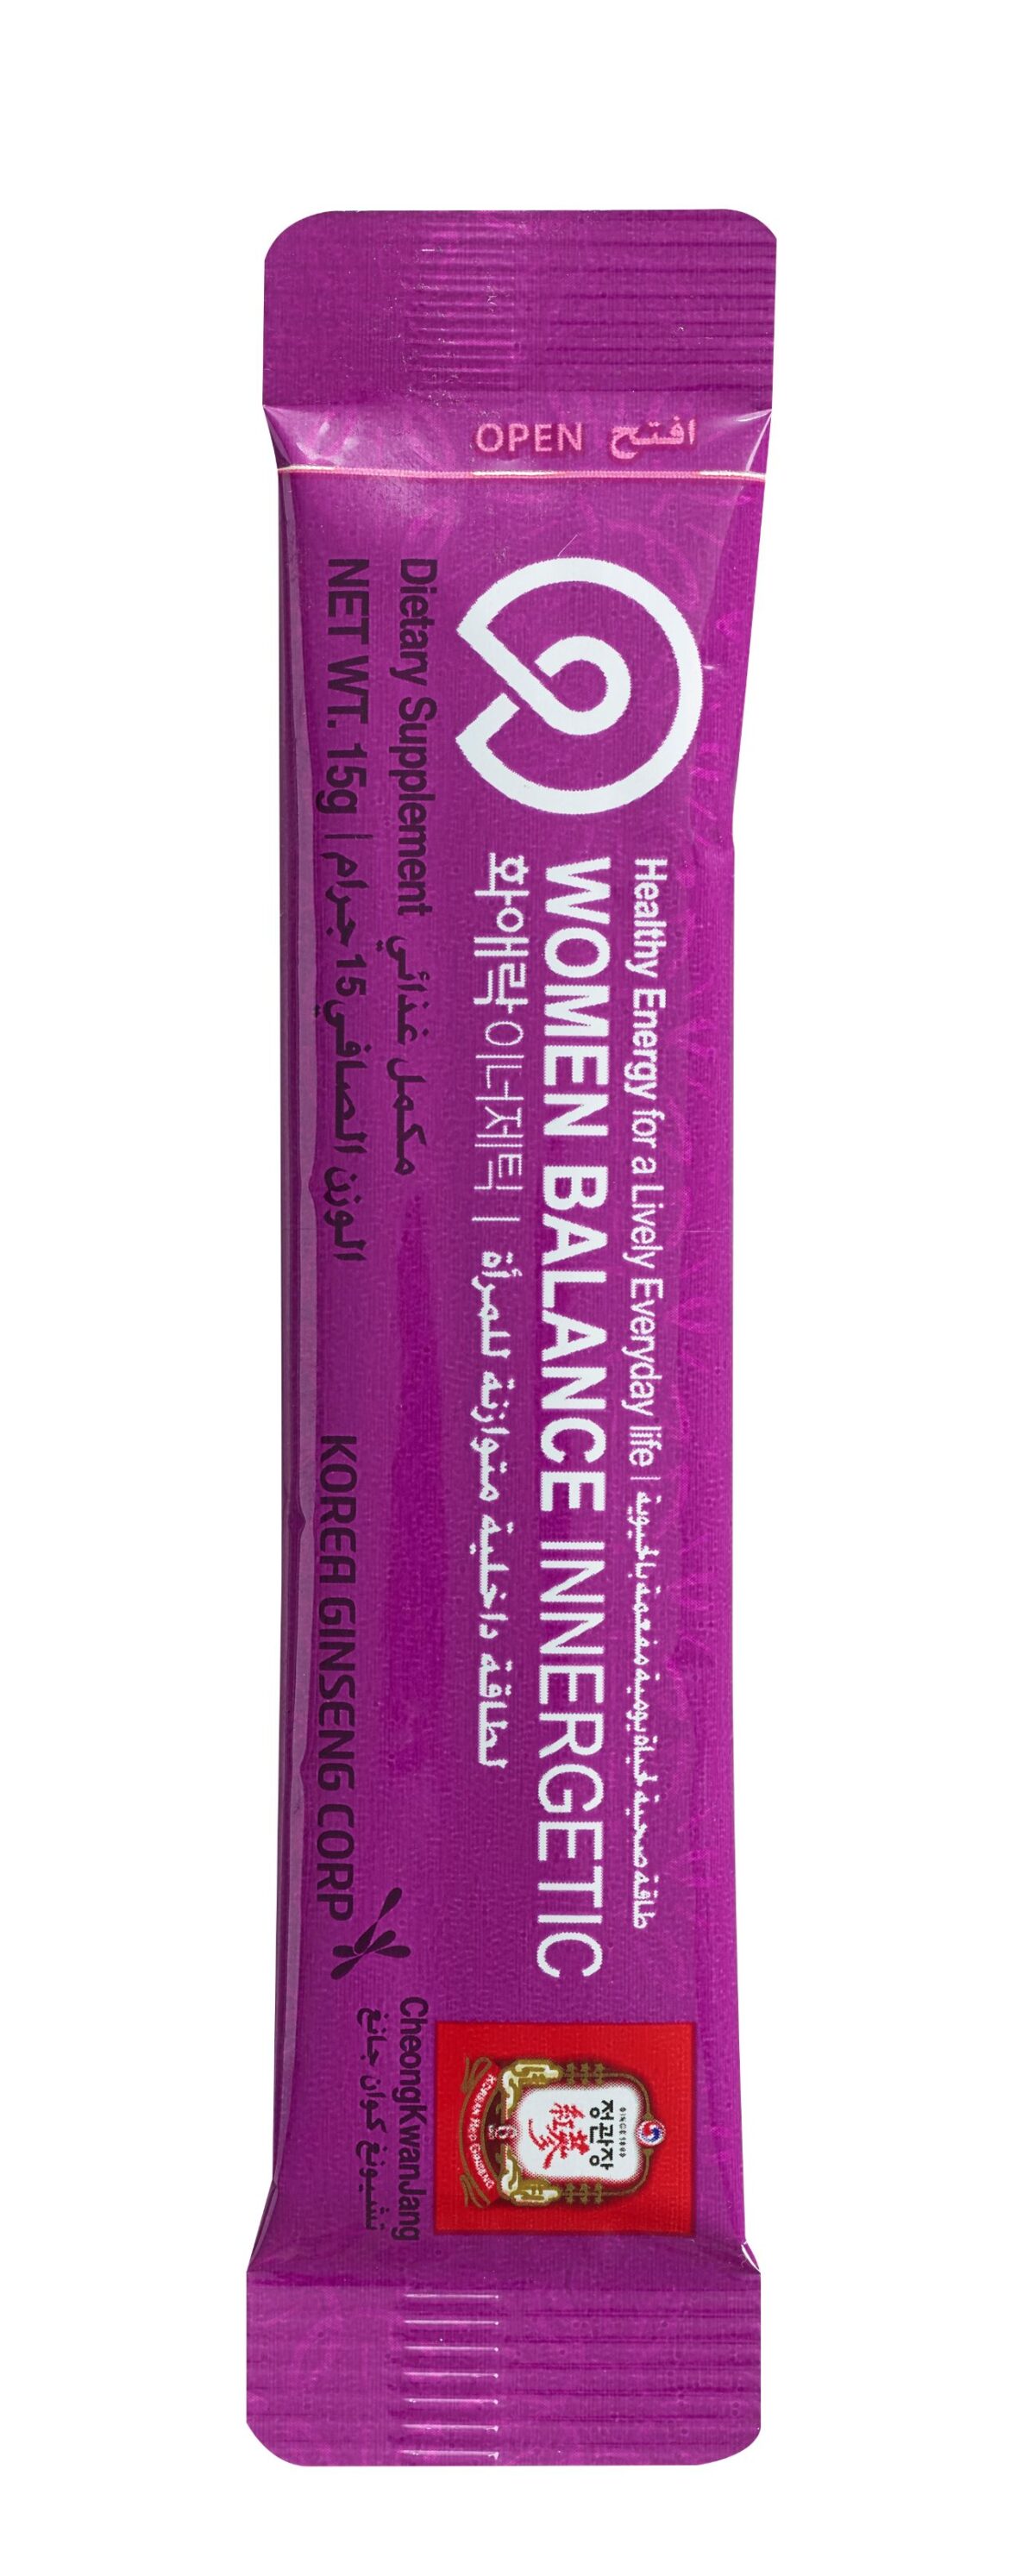 Women_Balance_Innergetic_Stick_front_side